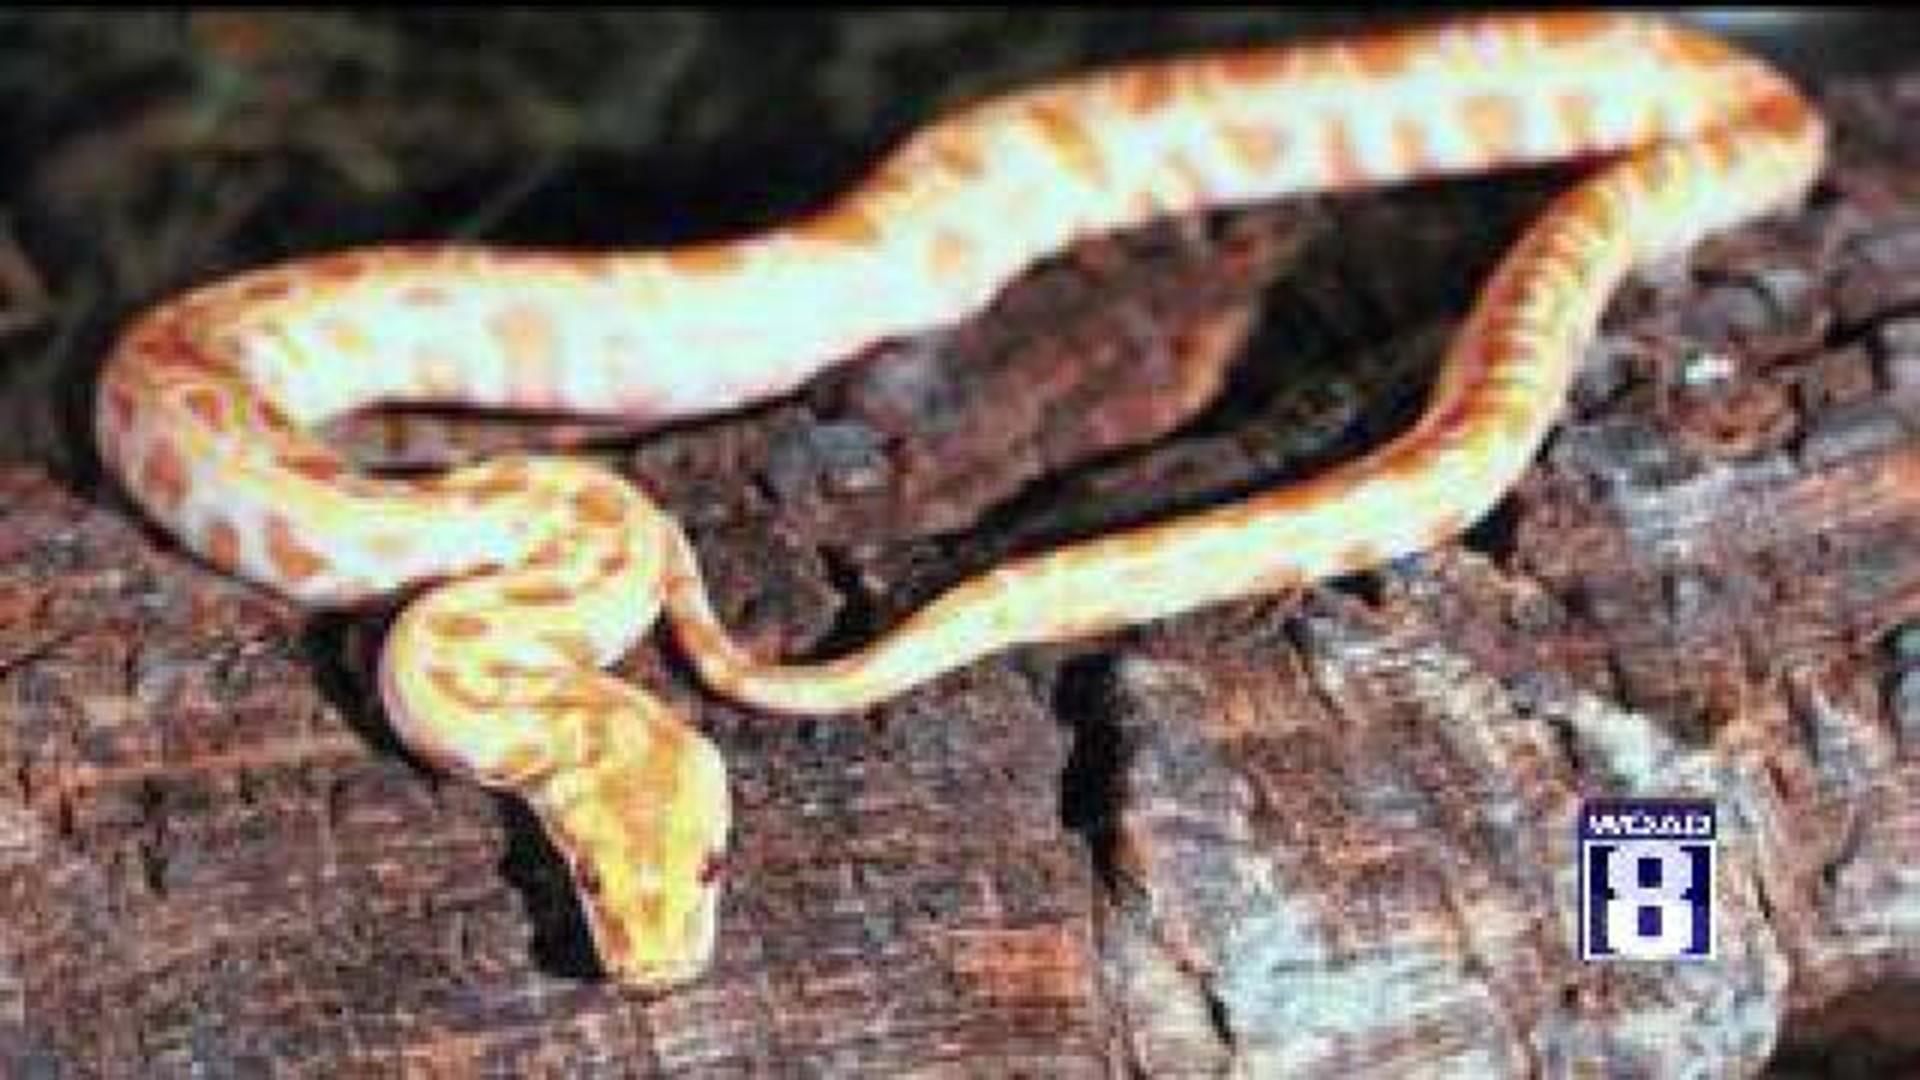 Woman sues over snake in motel bed